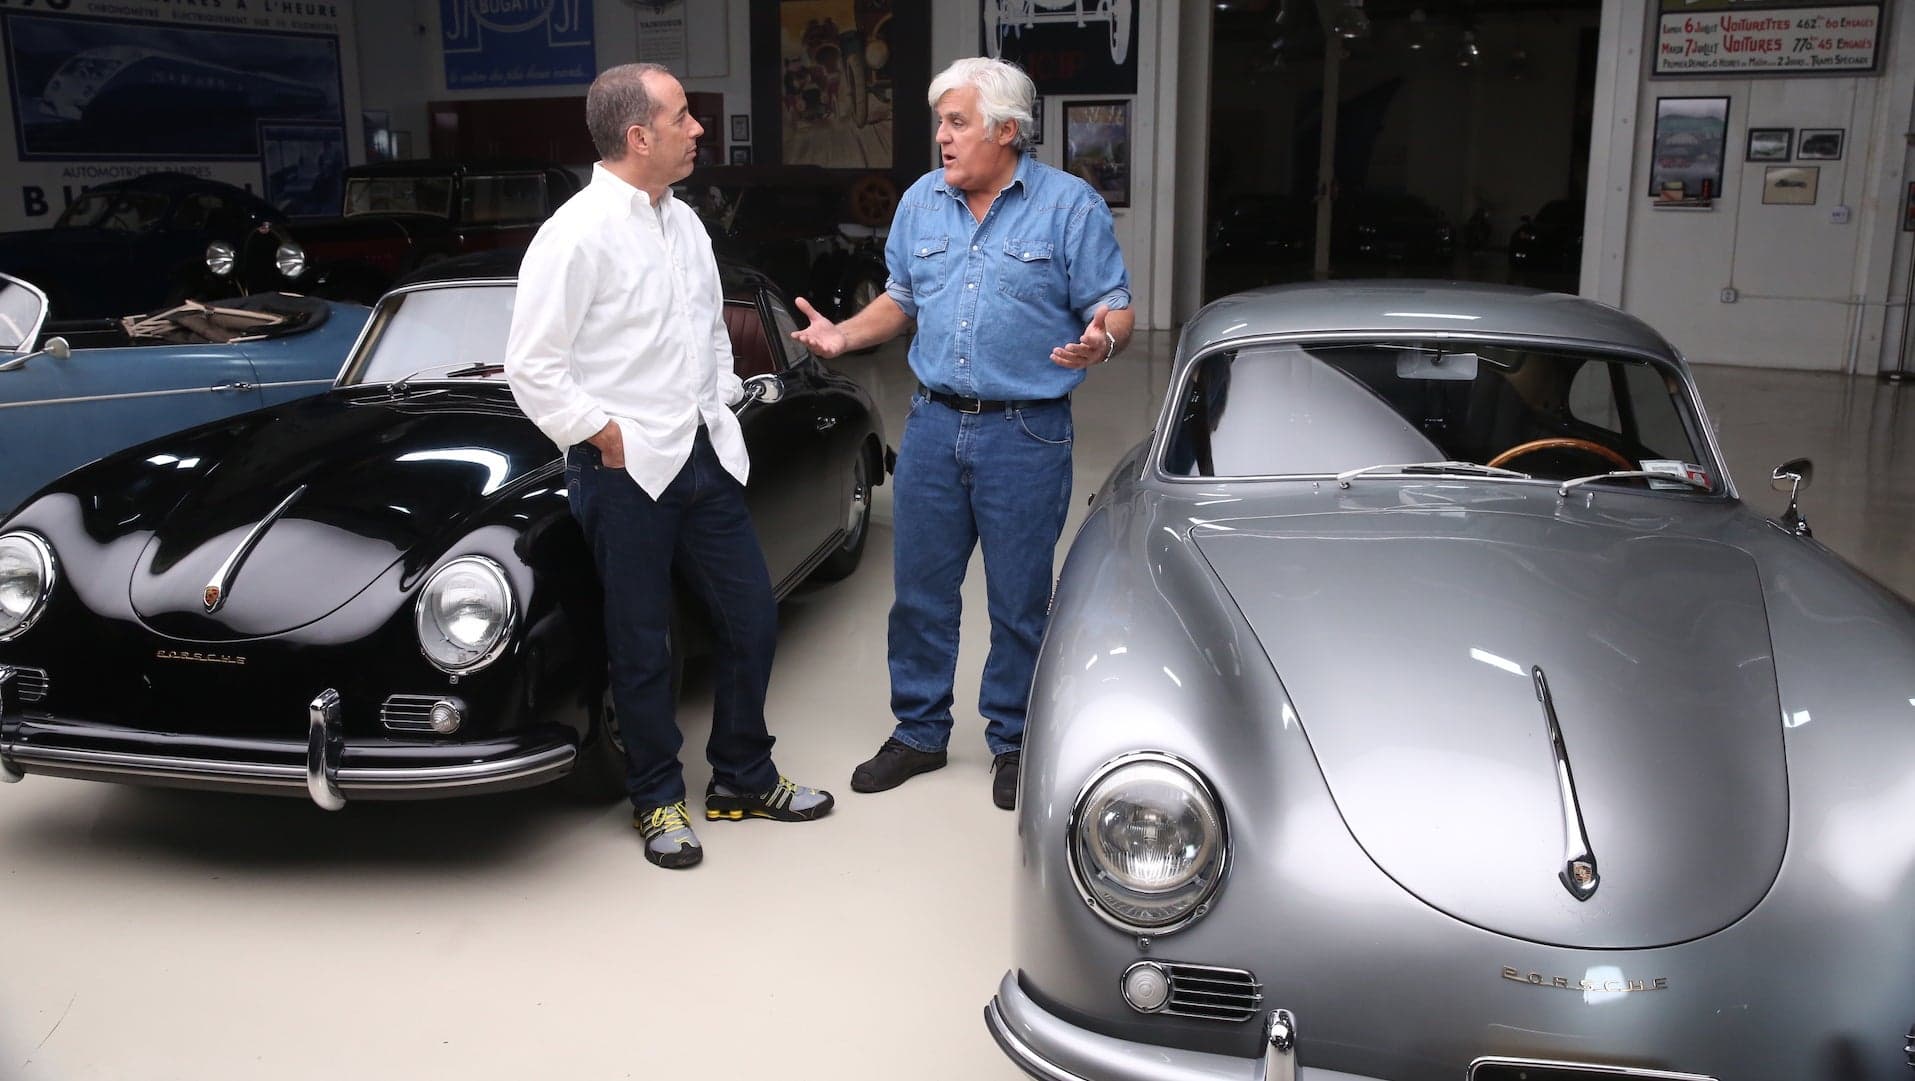 An Idiot Tried to Race Jay Leno and Jerry Seinfeld and Blew His Engine